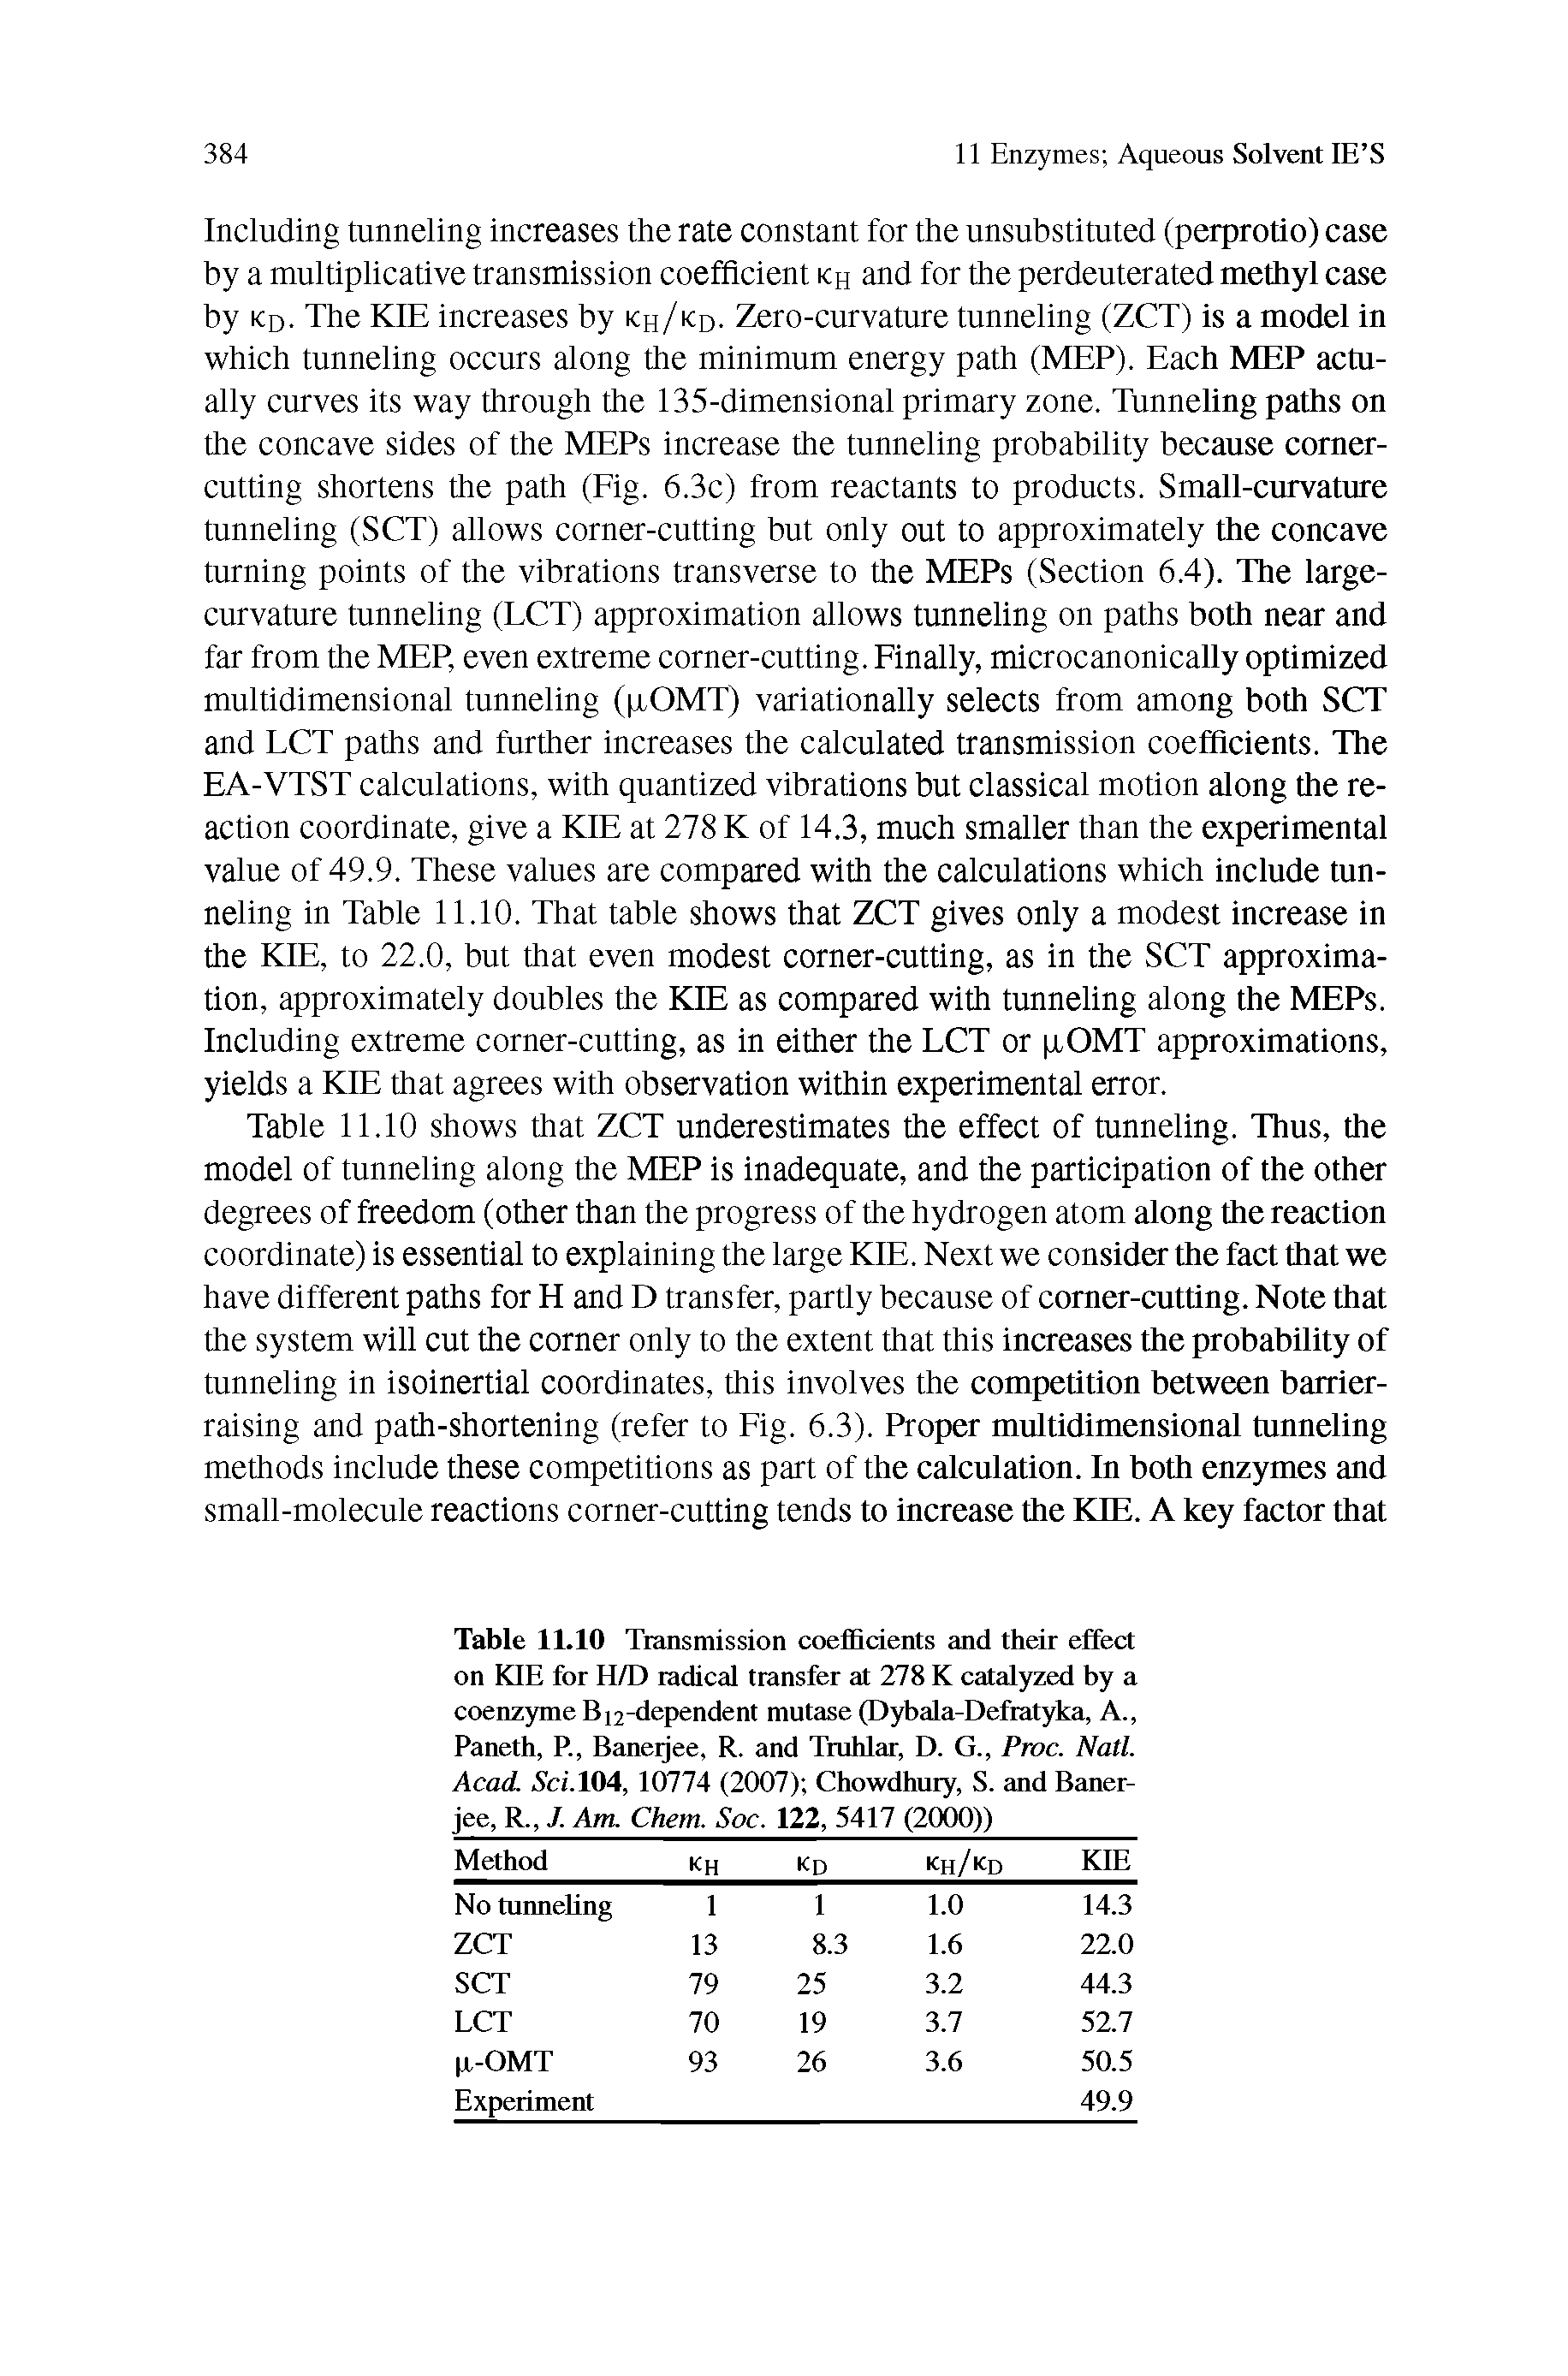 Table 11.10 Transmission coefficients and their effect on KIE for H/D radical transfer at 278 K catalyzed by a coenzyme B -dependent mutase (Dybala-Defratyka, A., Paneth, P., Baneijee, R. and Truhlar, D. G., Proc. Natl. Acad. 5c/.104, 10774 (2007) Chowdhury, S. and Baner-jee, R.,./. Am. Chem. Soc. 122, 5417 (2000)) ...